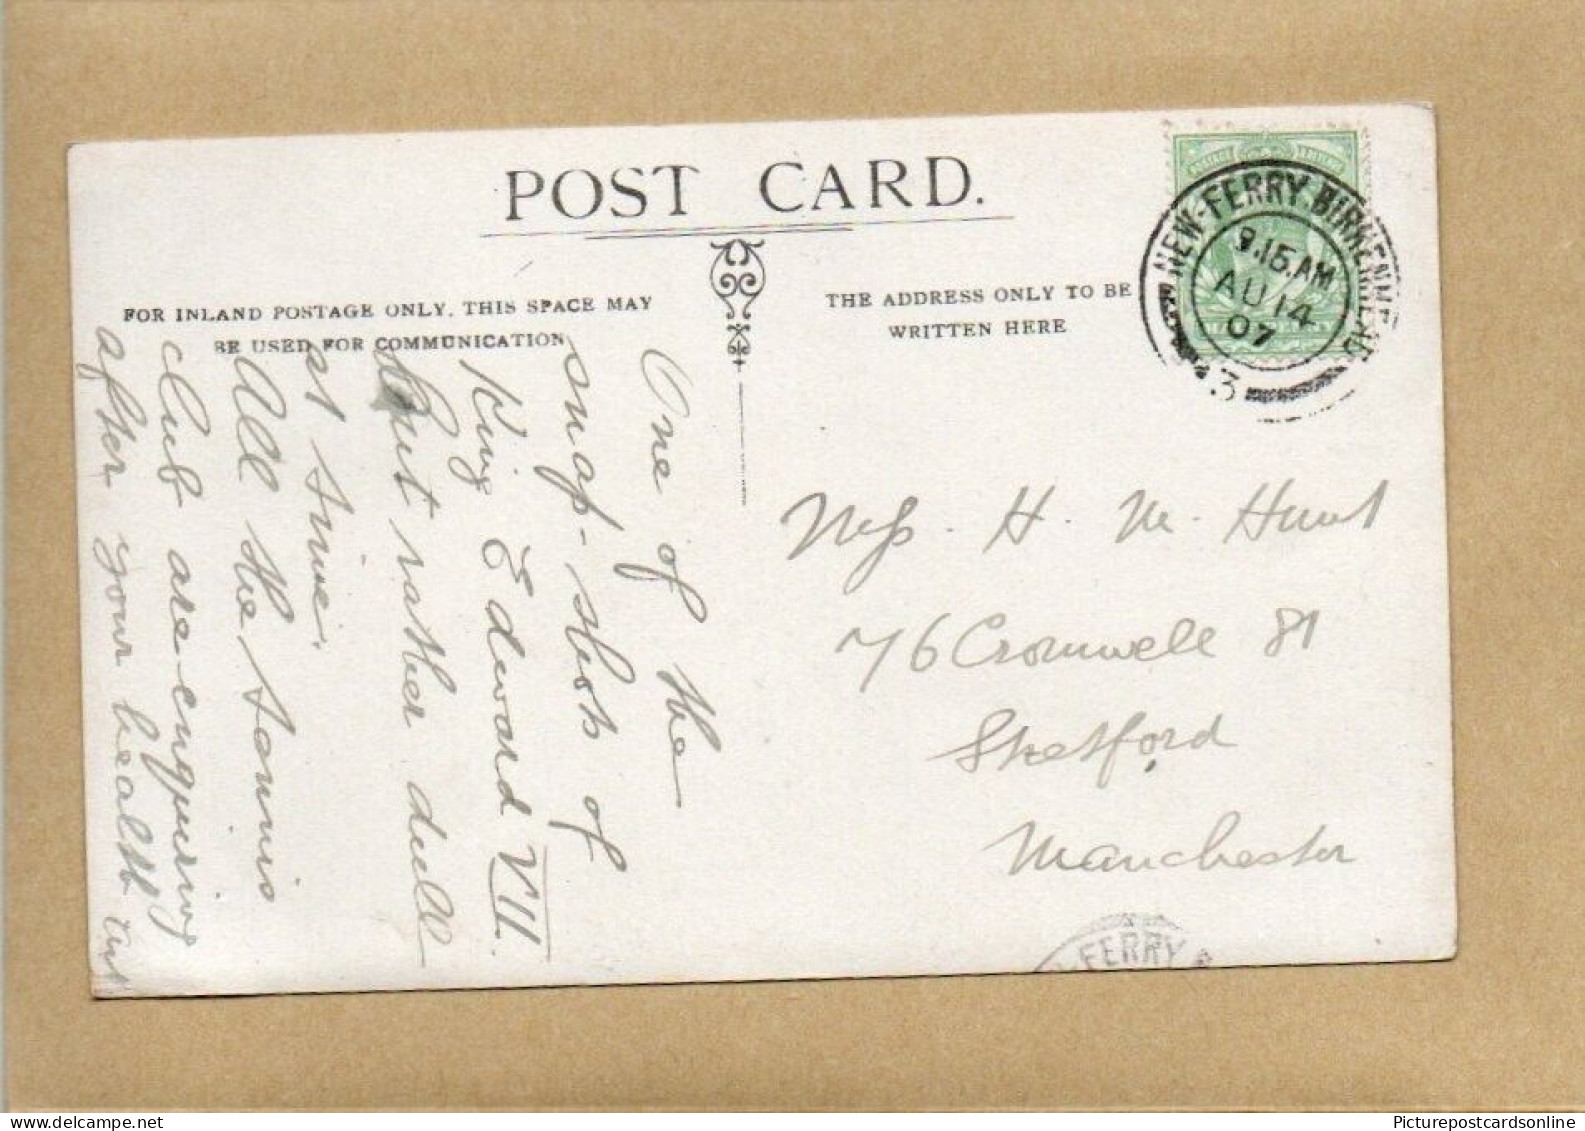 700 YEAR CELEBRATION OF LIVERPOOL 4 OLD RP POSTCARDS WITH MESSAGES SHIPPING RARE LANCASHIRE